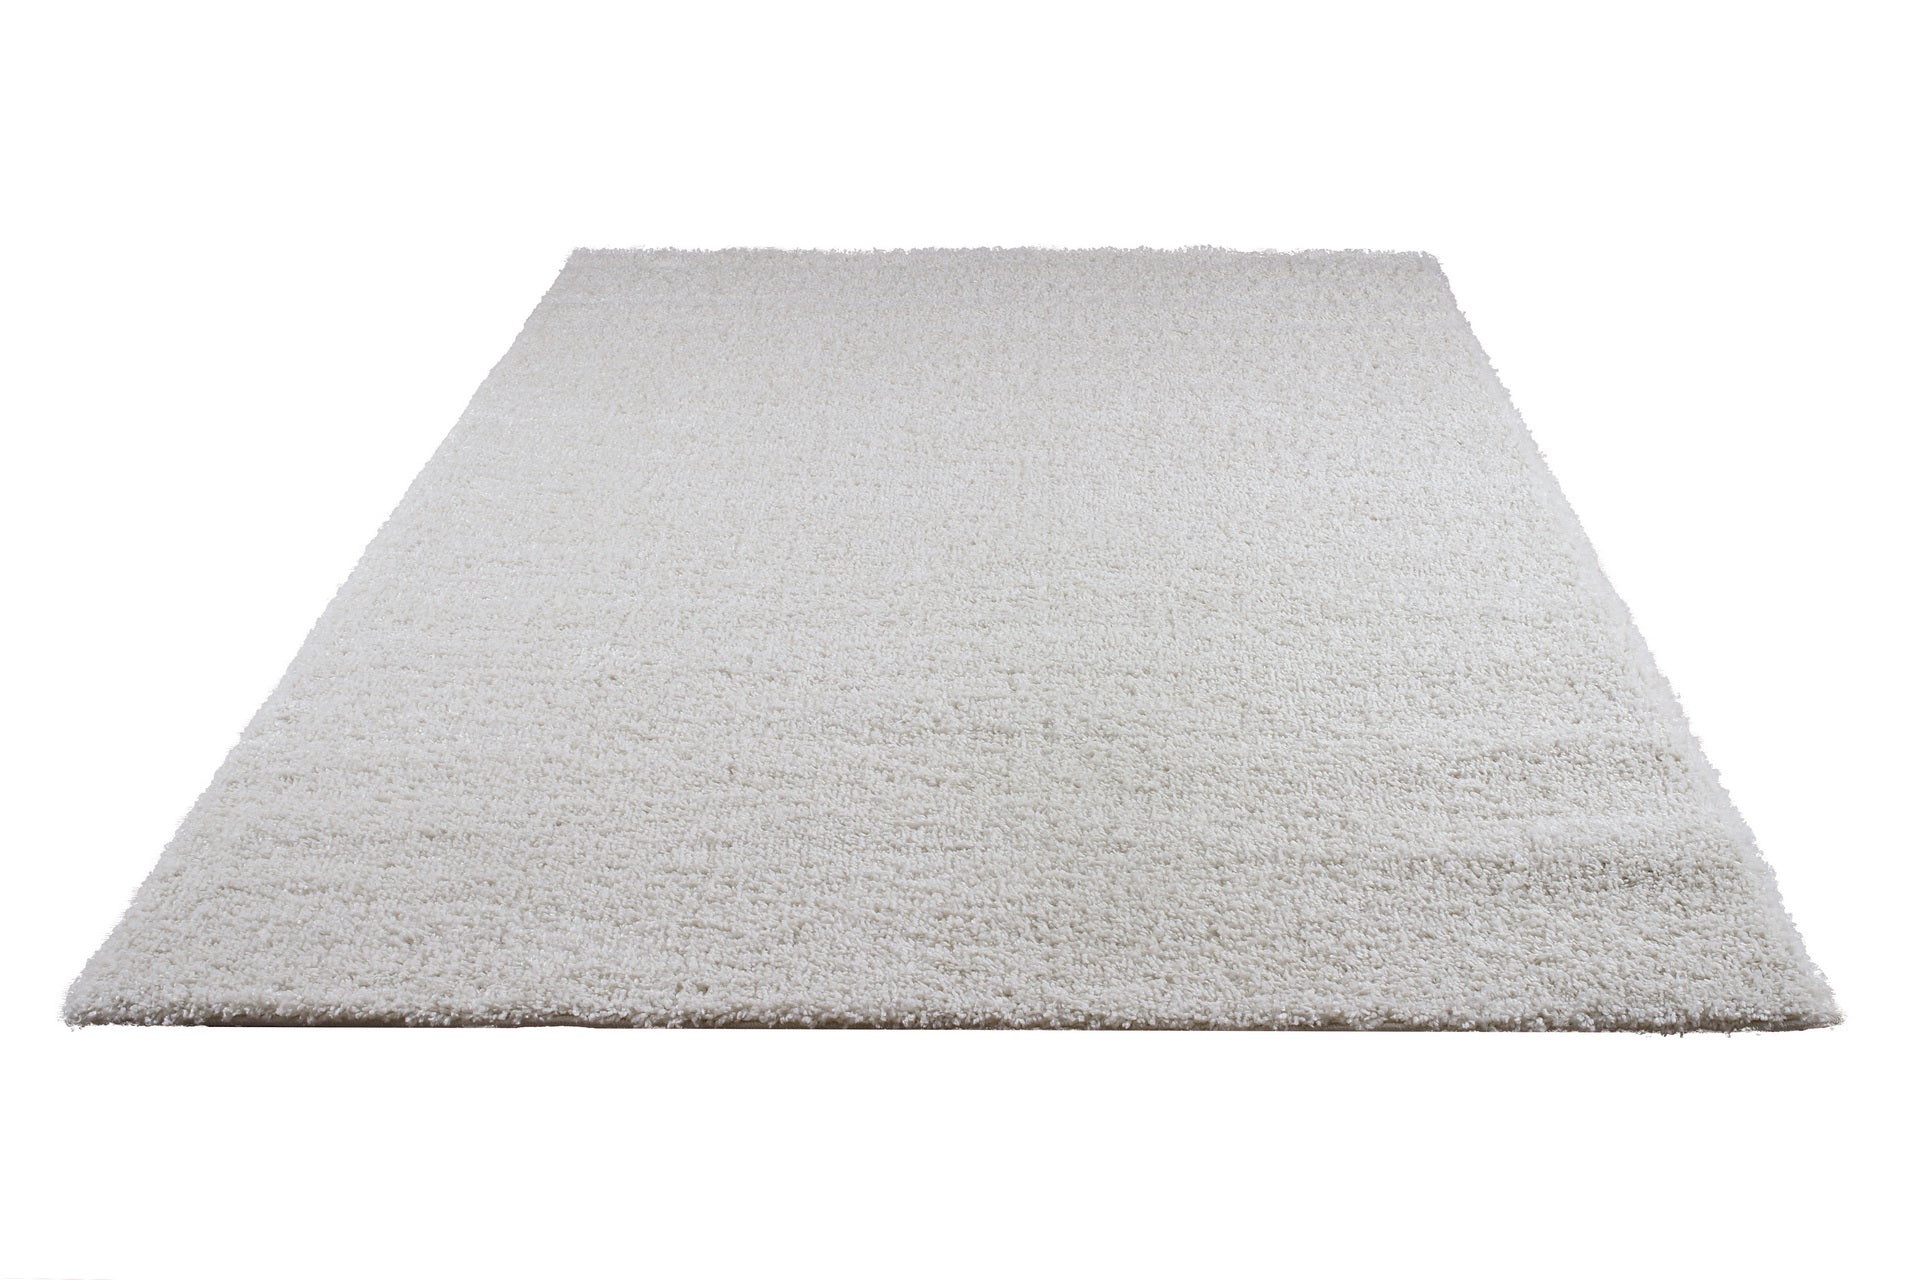 ladole rugs solid color shaggy meknes durable beautiful turkish indoor small mat doormat rug in ivory 110 x 211 57cm x 90cm 6x8, 6x9 ft Living Room, Bedroom, Dining Area, Kitchen Carpet